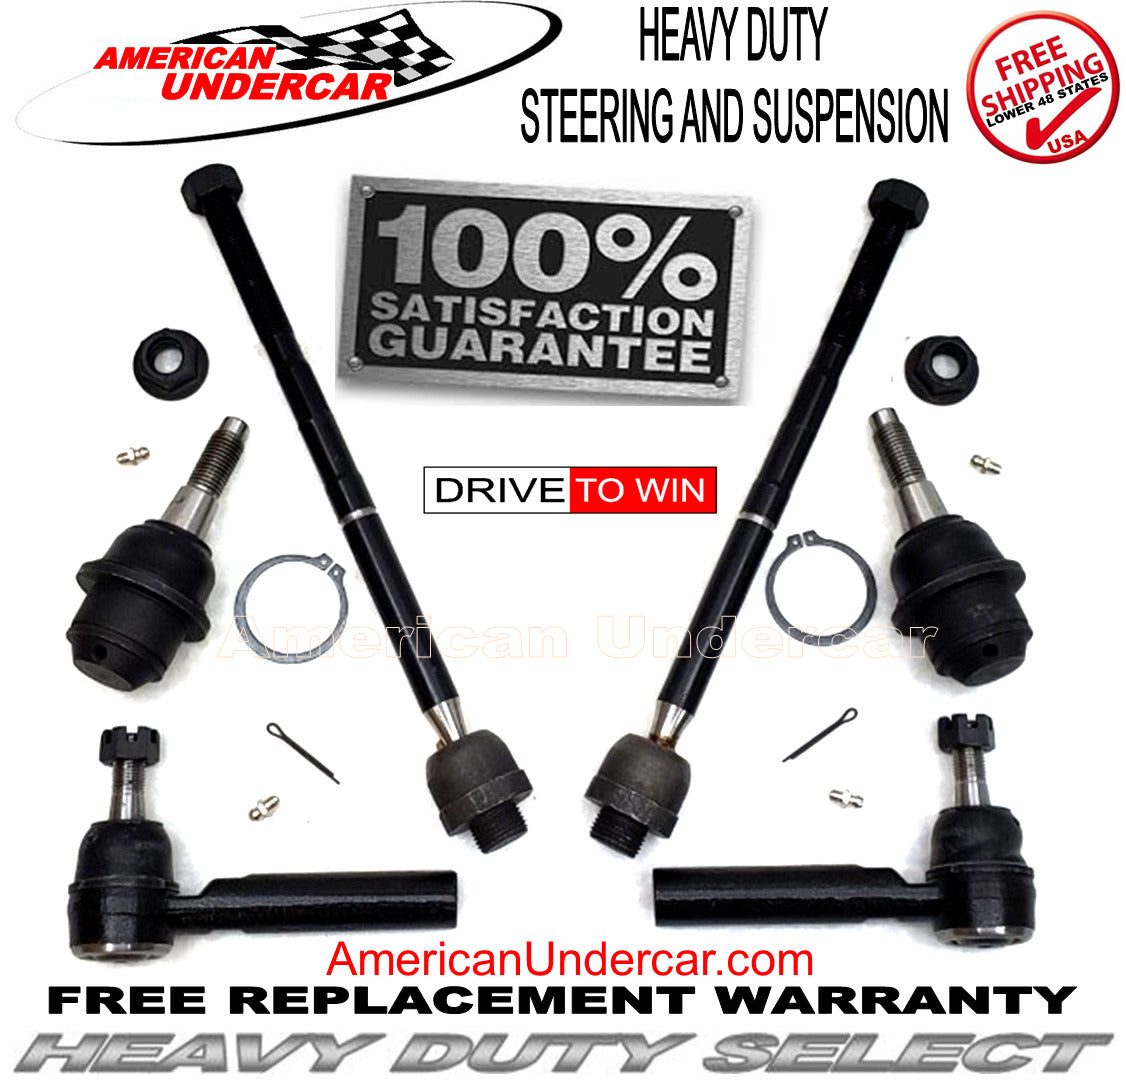 HD Ball Joint & Tie Rod Steering Assembly Kit for 2014-2018 Chevrolet, GMC, Cadillac 2WD, 4x4